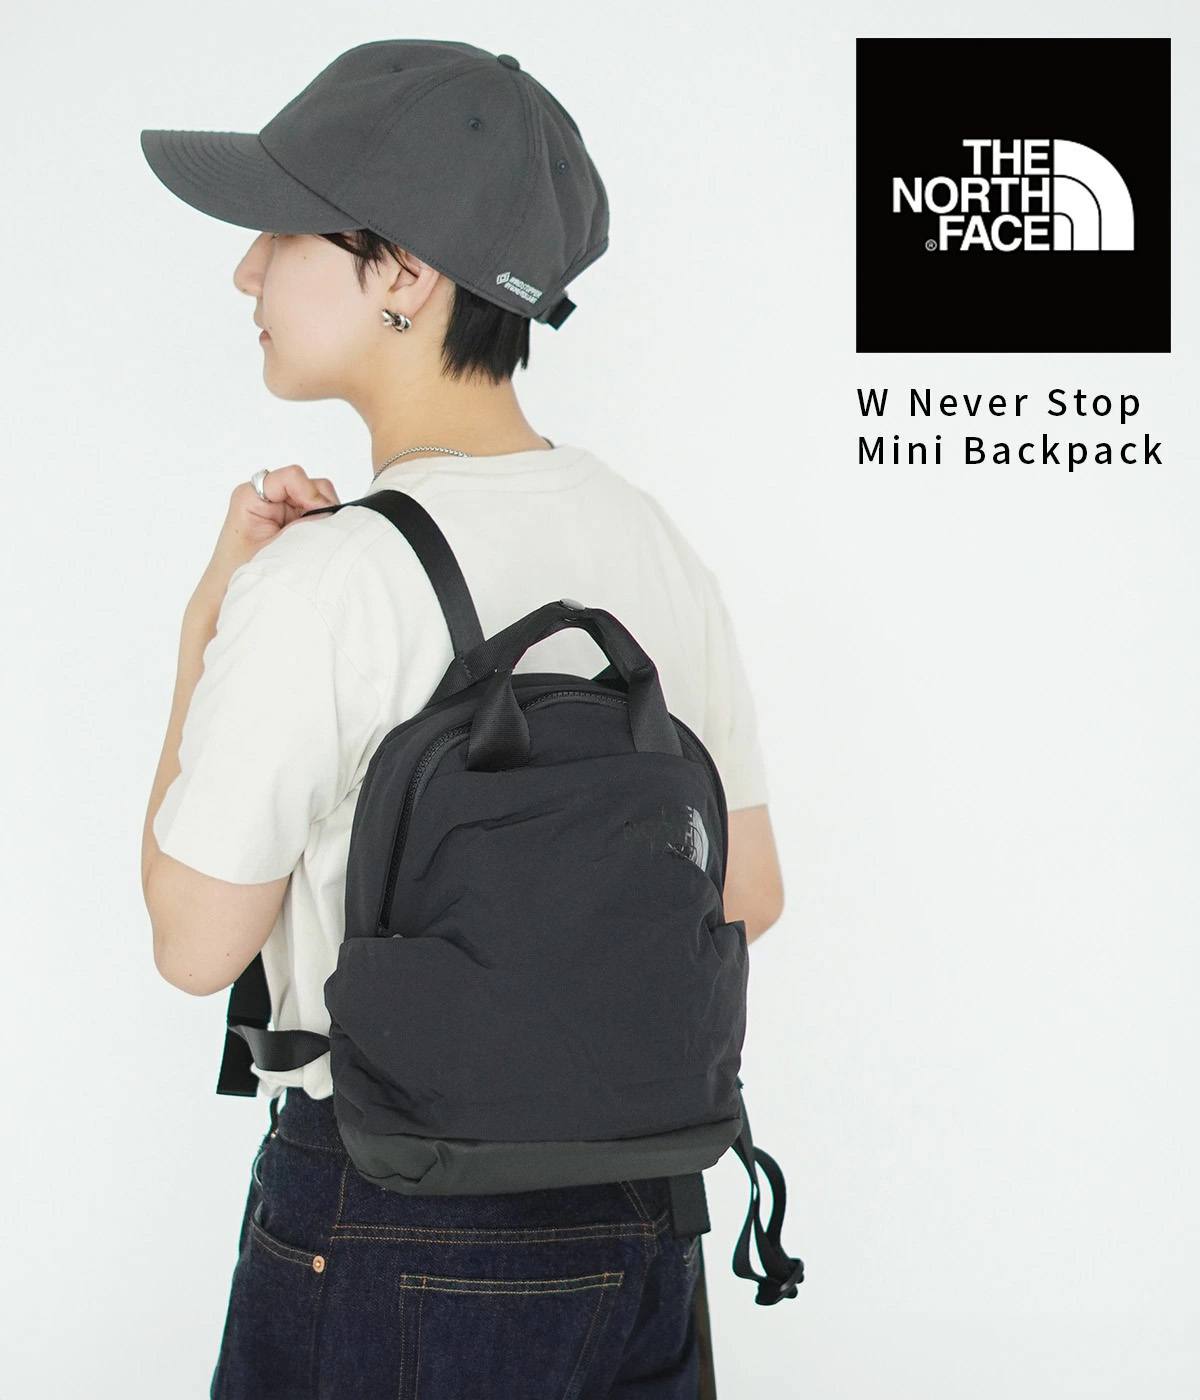 THE NORTH FACE / ザ ノースフェイス ： W Never Stop Mini Bac...